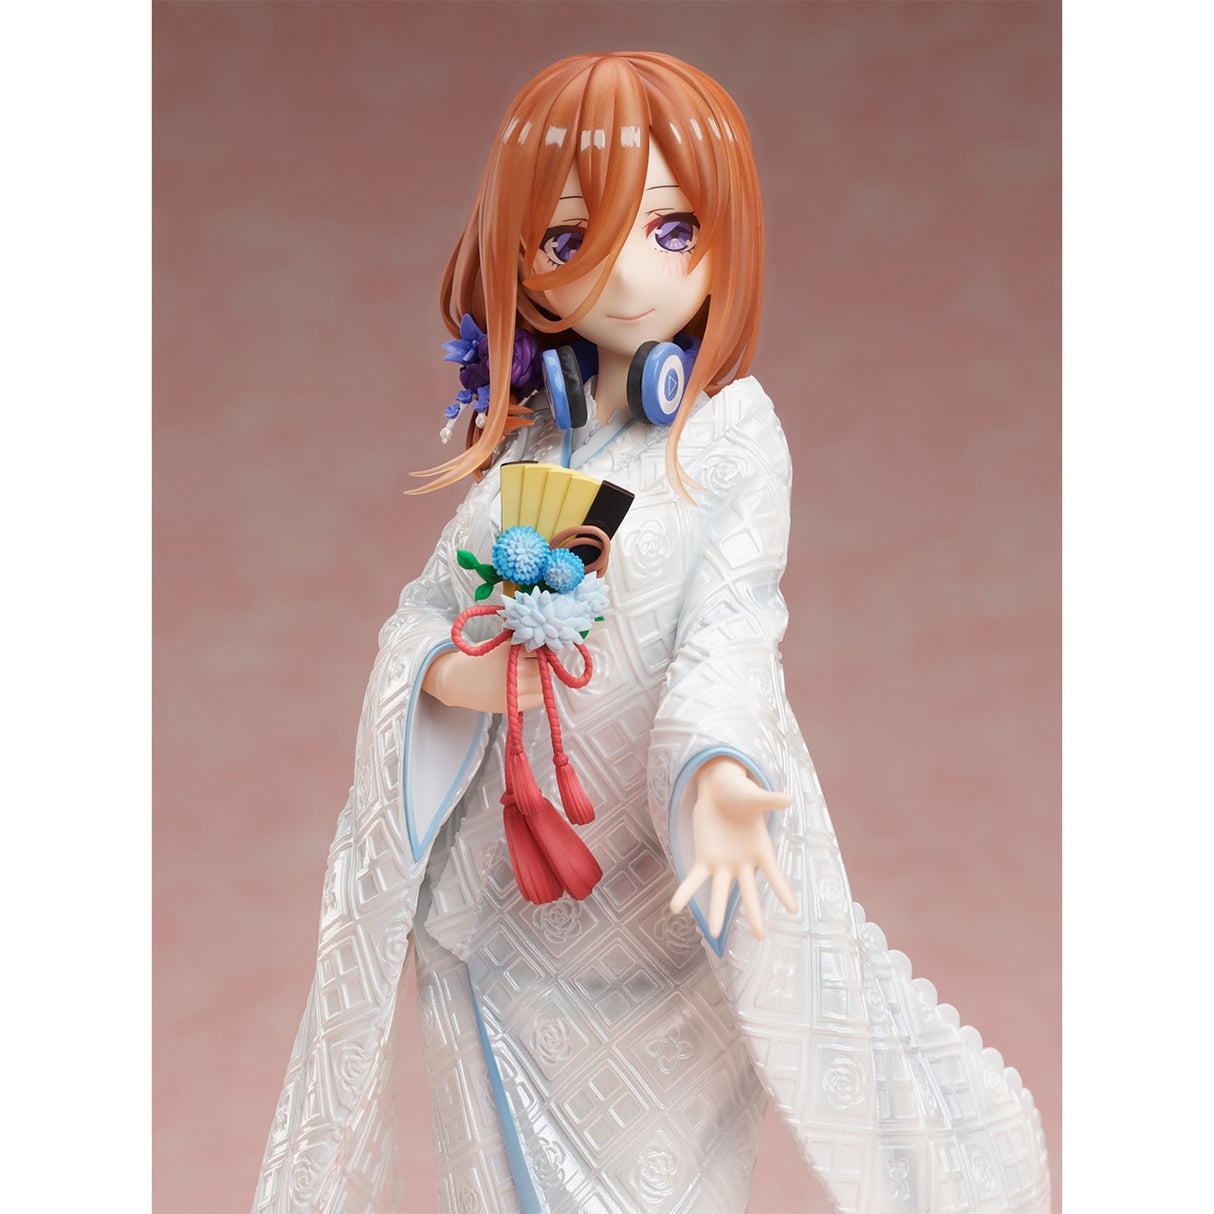 This figurine showcase the purity and charm of Miku in stunning detail. | If you are looking for more The Quintessential Merch, We have it all! | Check out all our Anime Merch now!